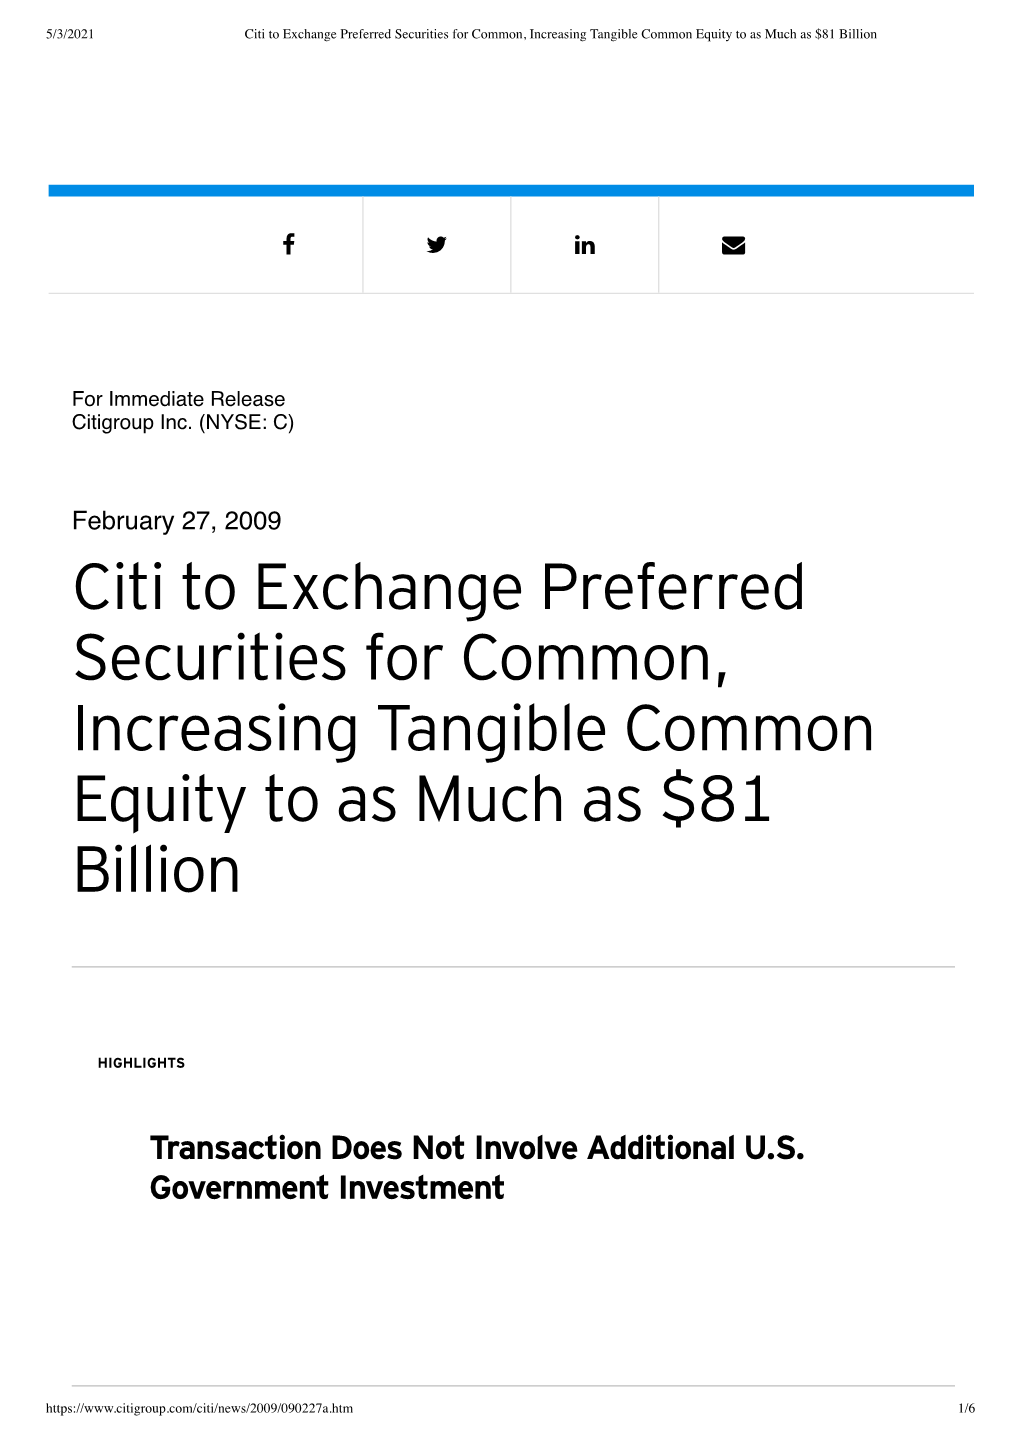 Citi to Exchange Preferred Securities for Common, Increasing Tangible Common Equity to As Much As $81 Billion